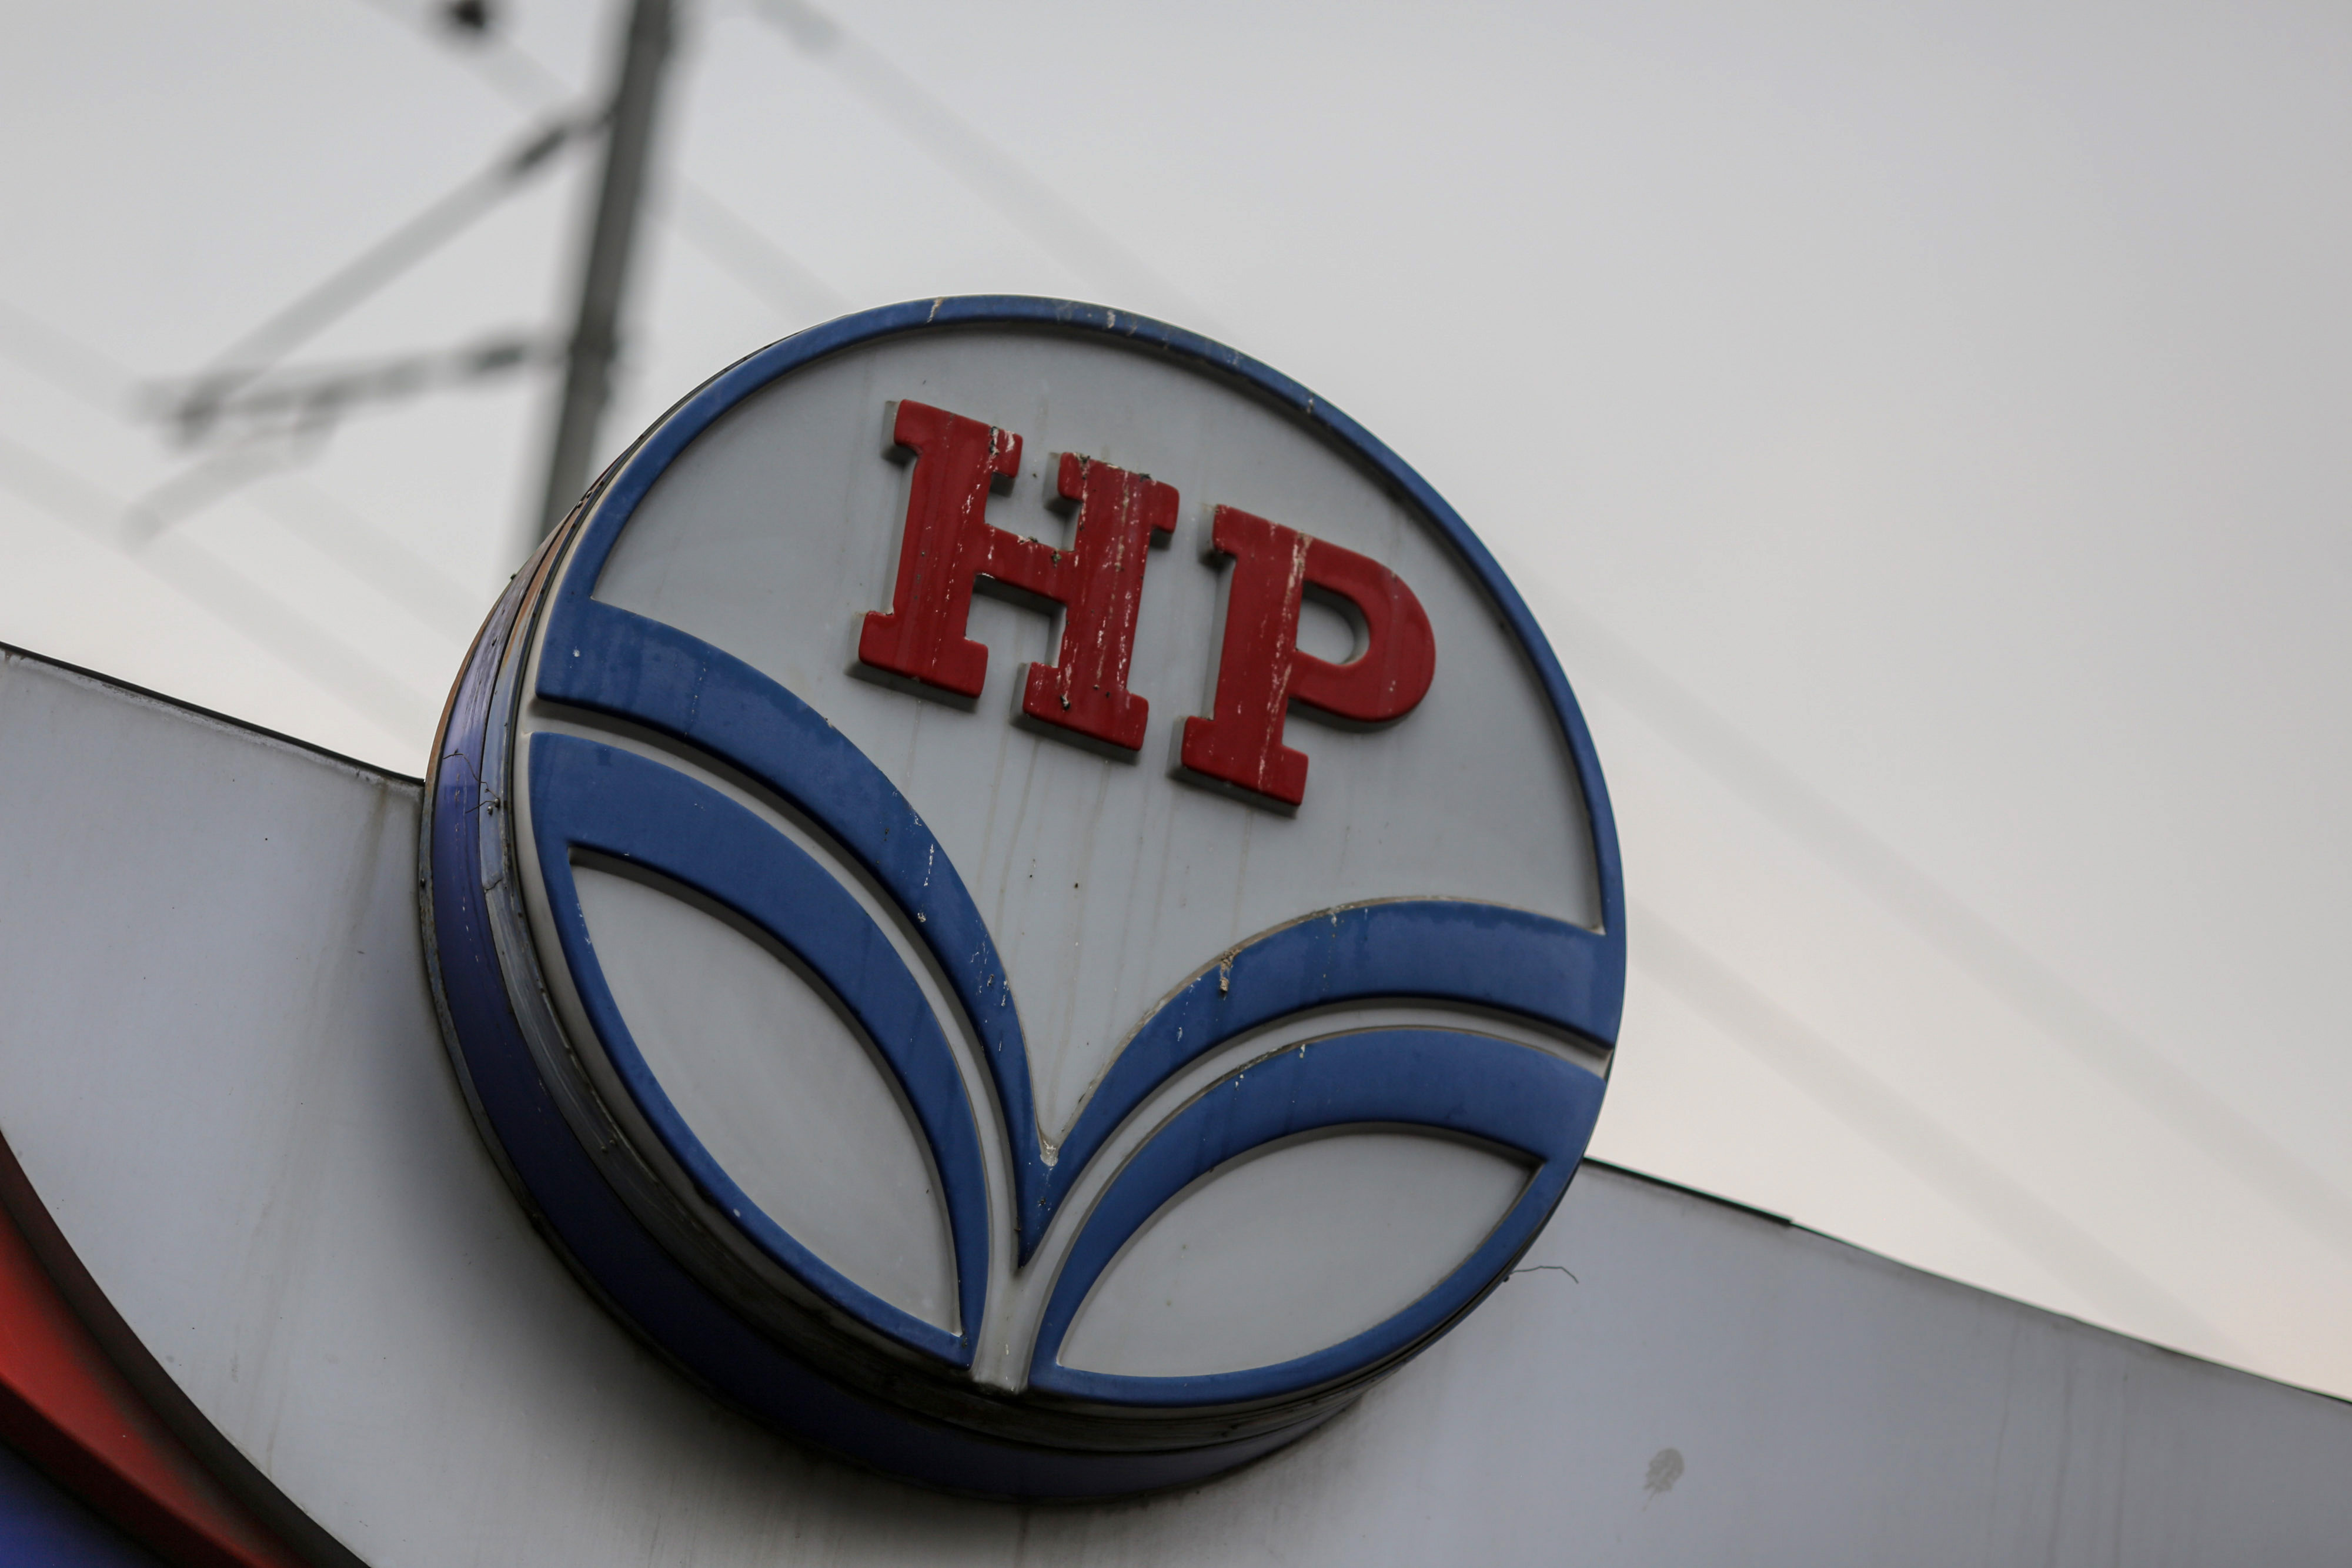 Hp Petrol Pump Photos and Images | Shutterstock